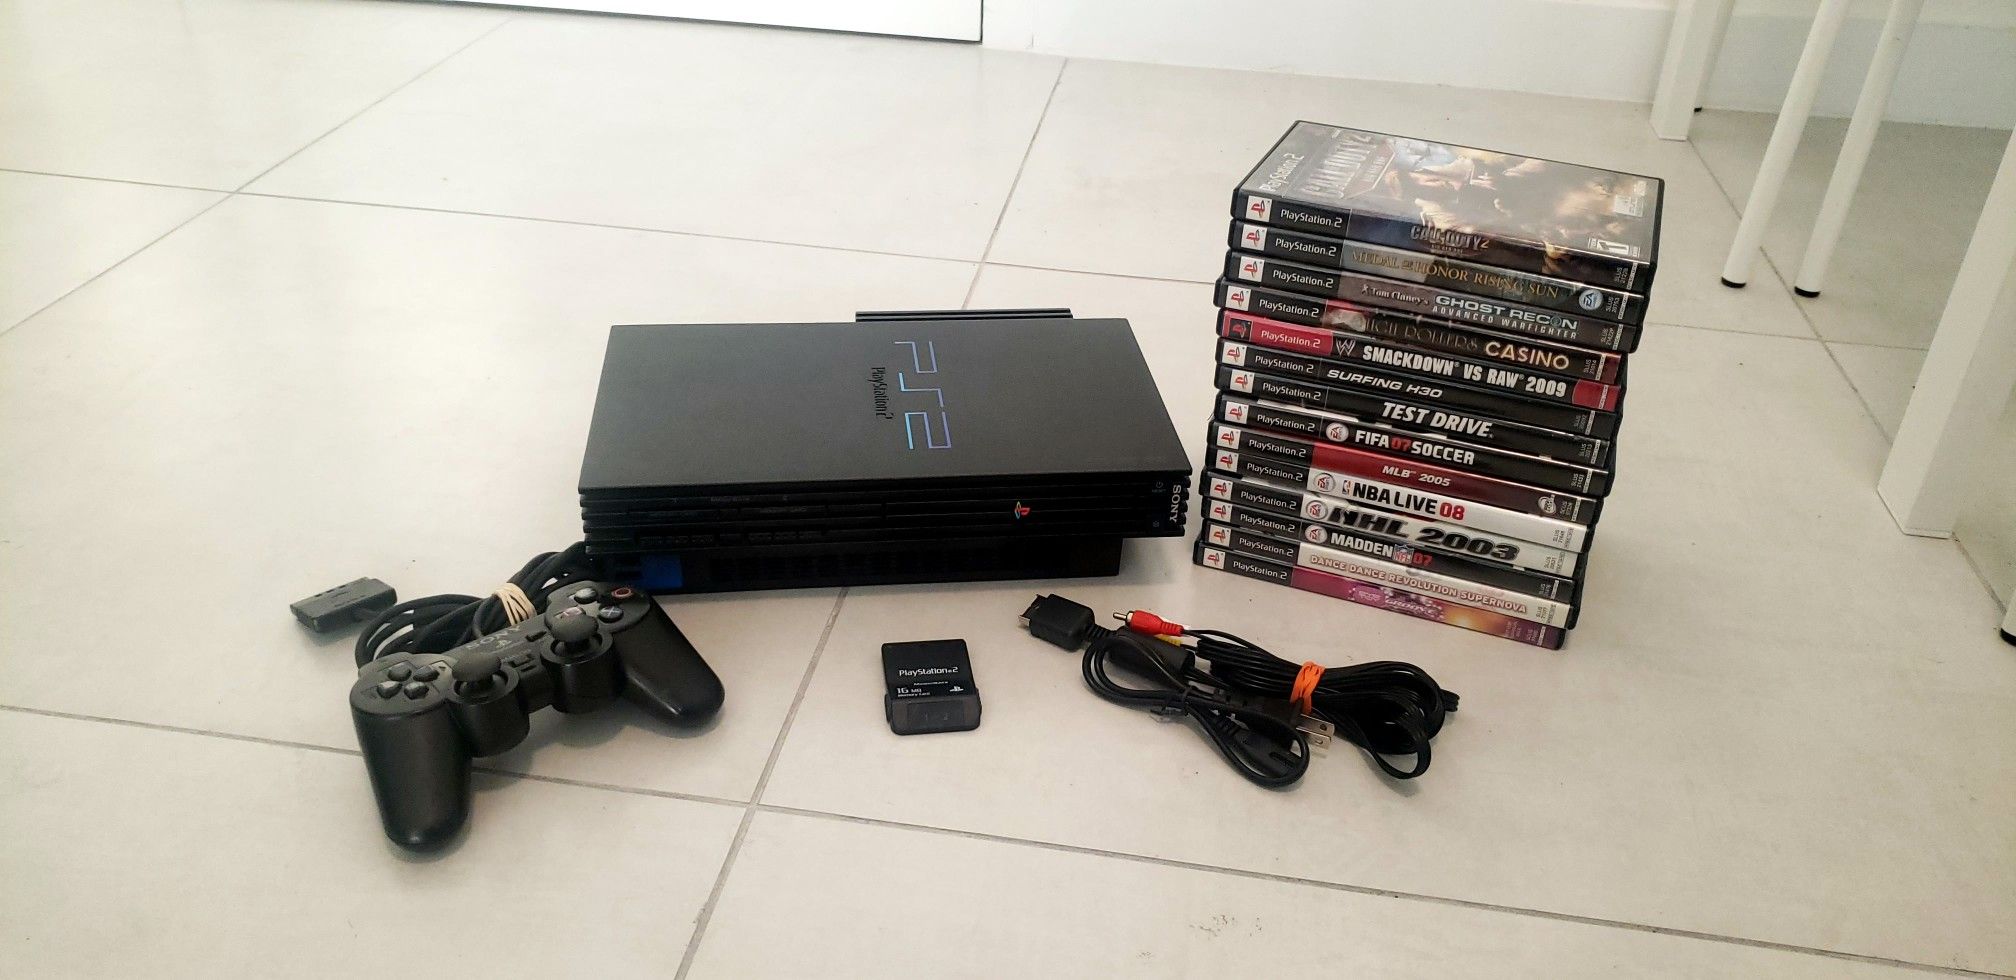 Ps2 Fat in Great condition with games